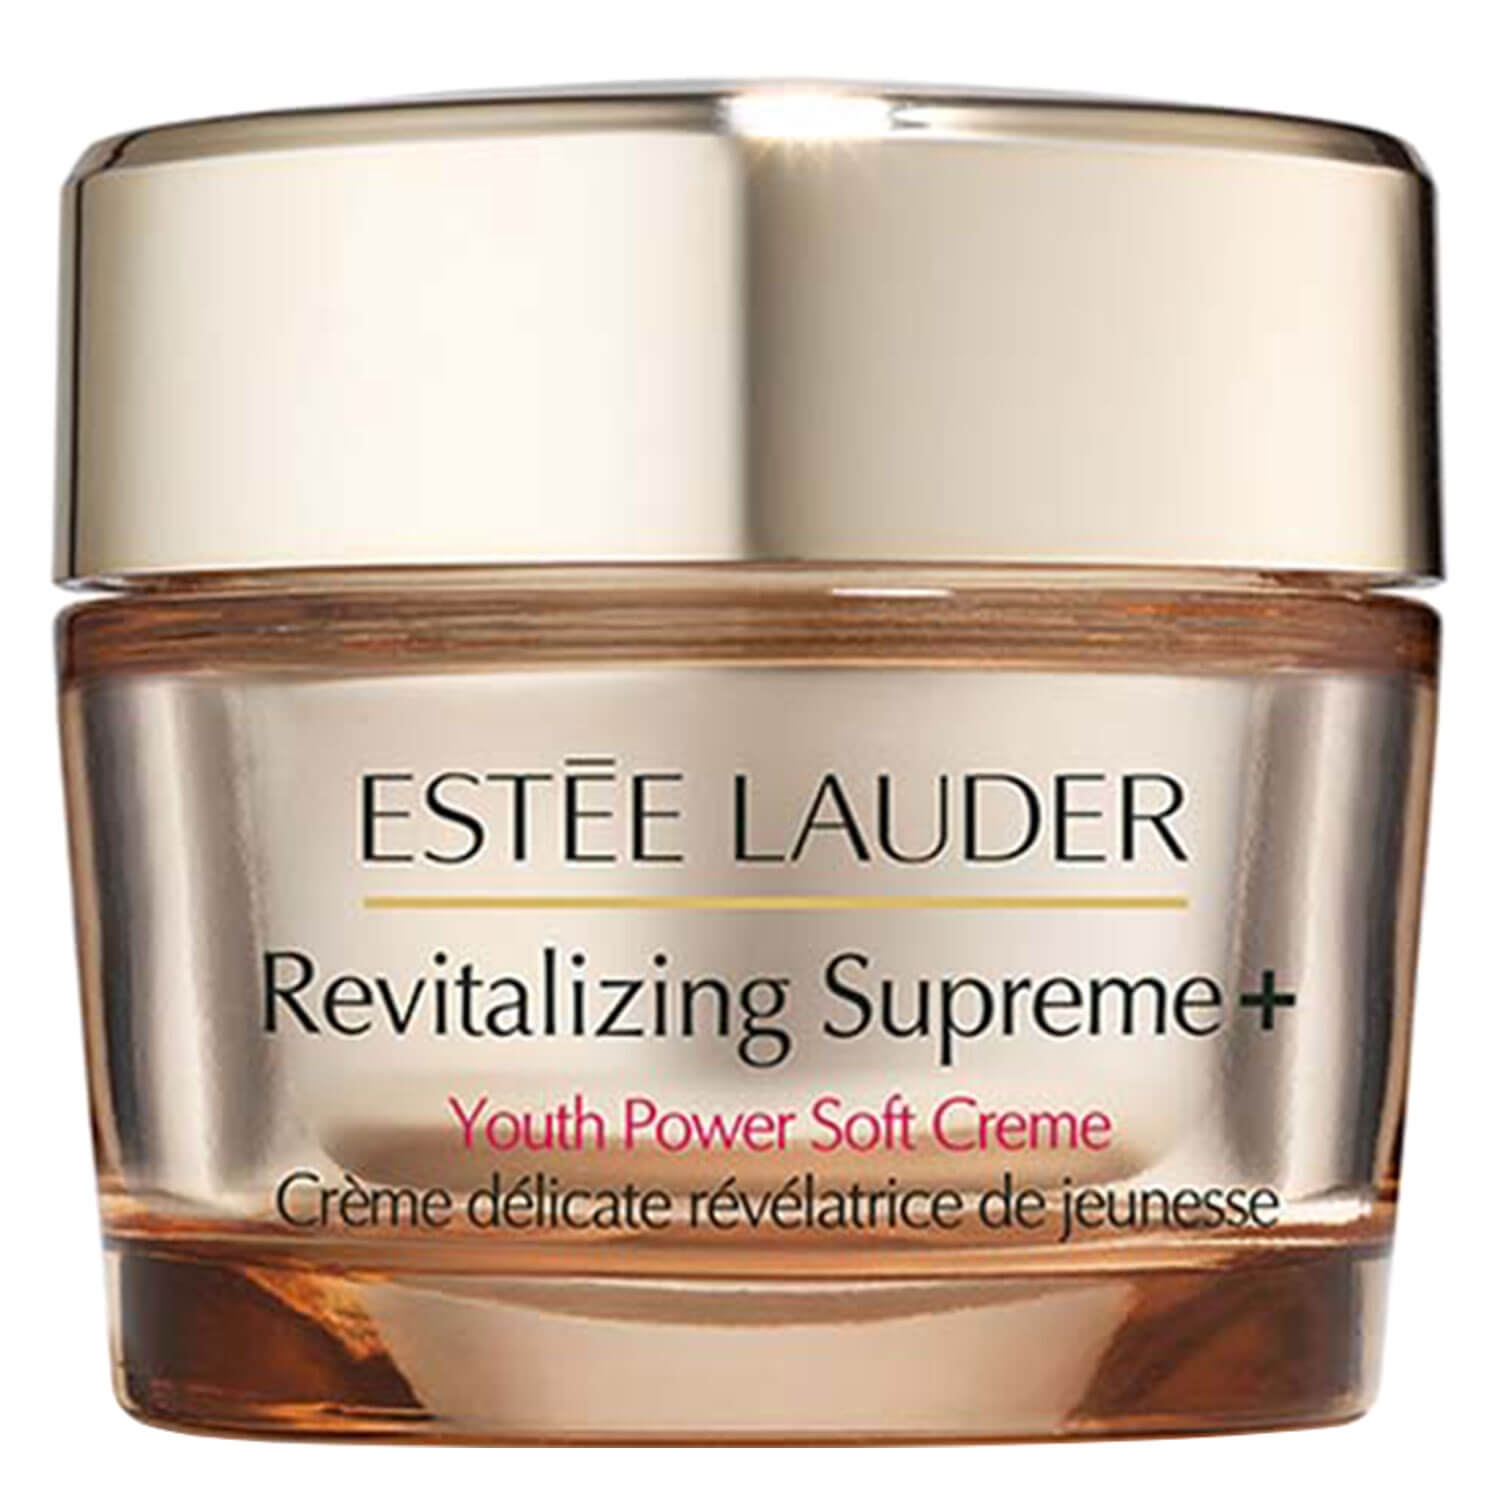 Product image from Revitalizing Supreme+ - Youth Power Soft Creme